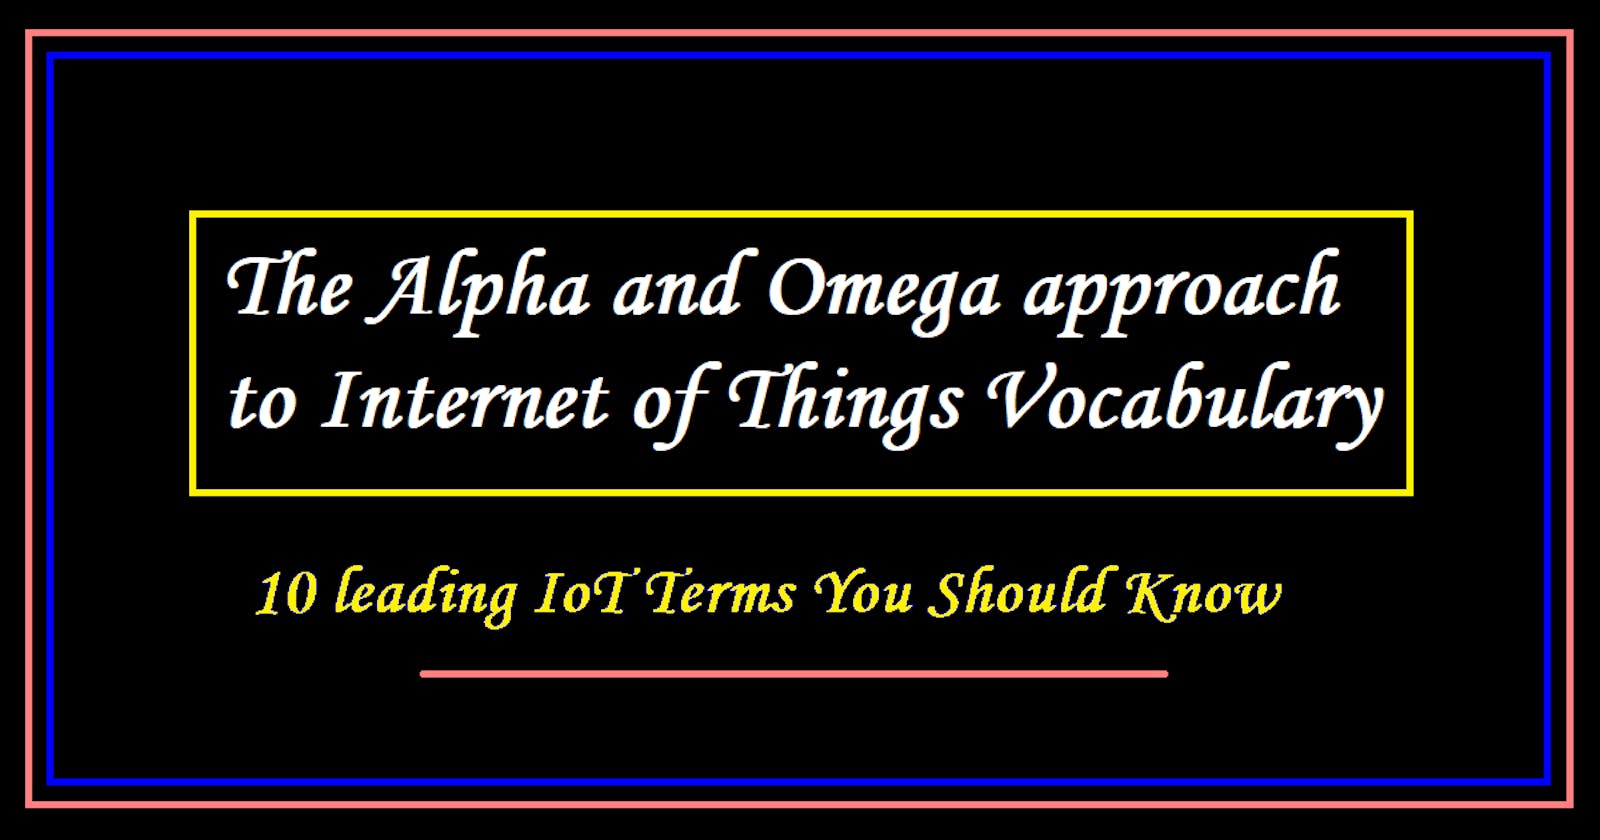 The Alpha and Omega approach to Internet of Things Vocabulary ©